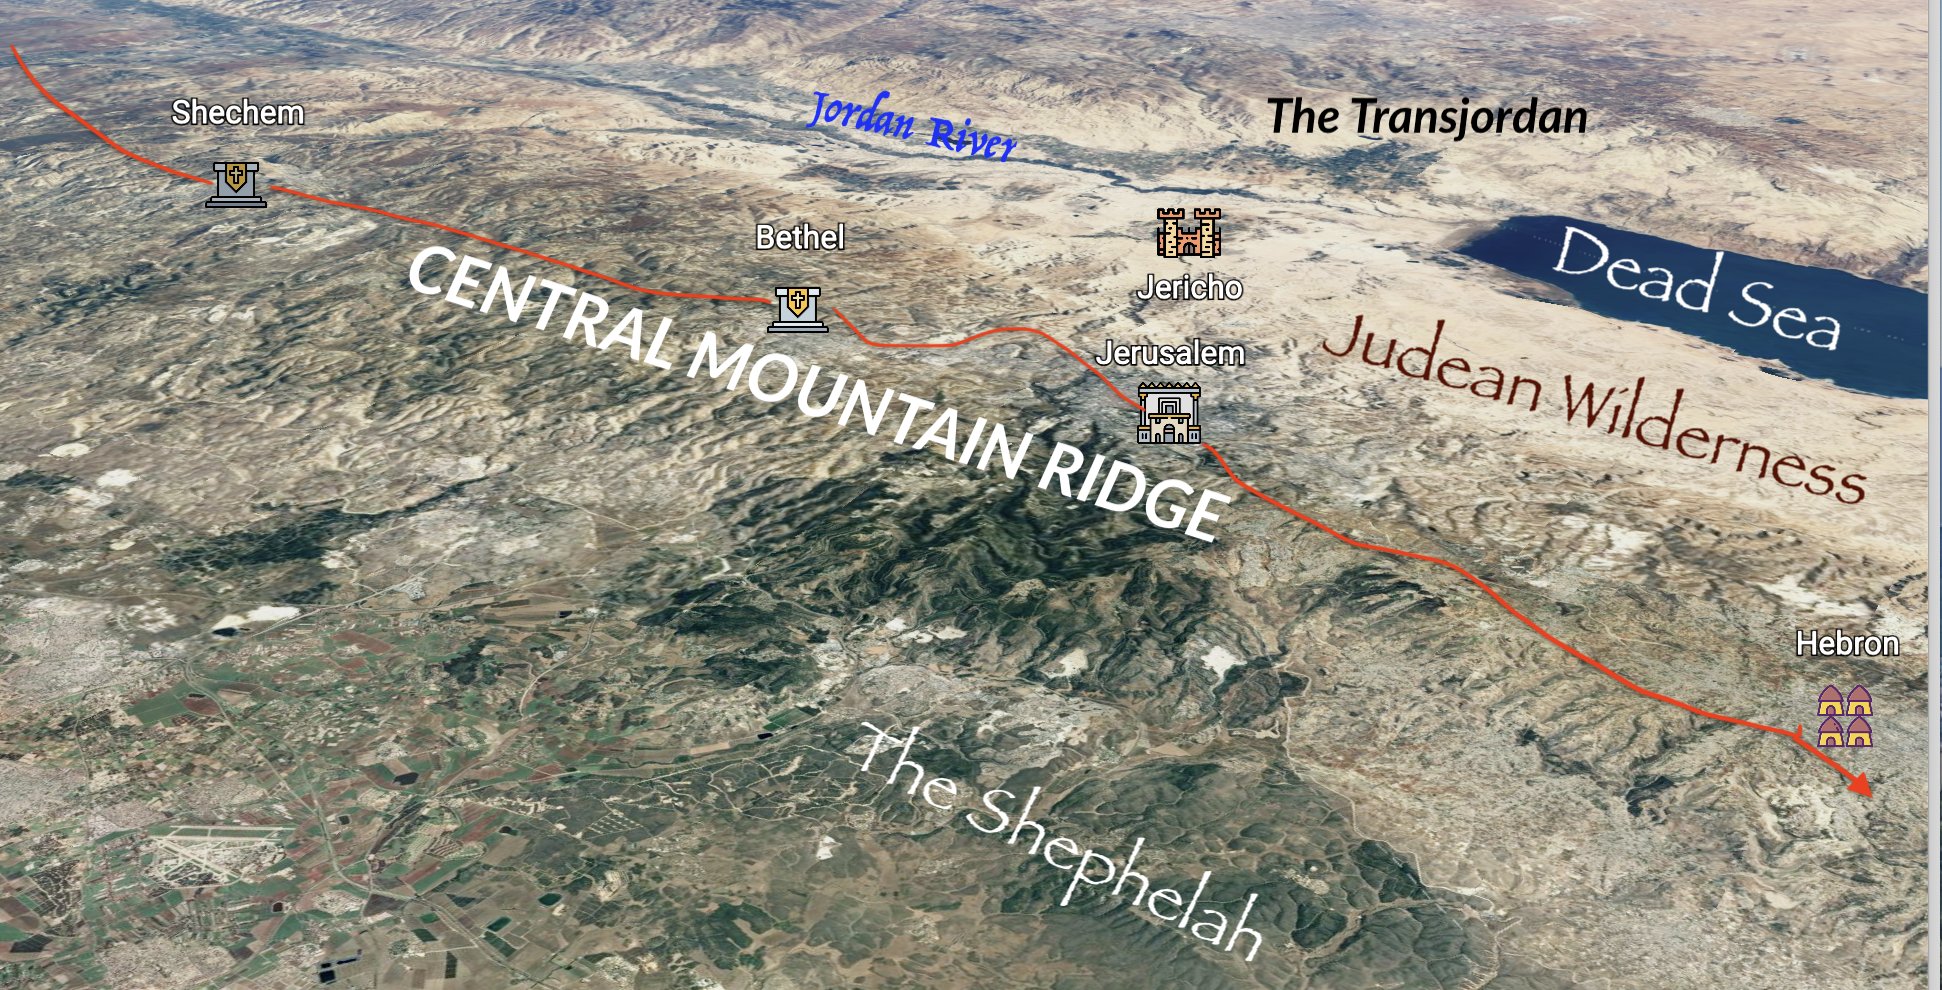 Shechem sat astride the Central Mountain Ridge with Bethel, Ai, Shiloh and Jerusalem to the south.